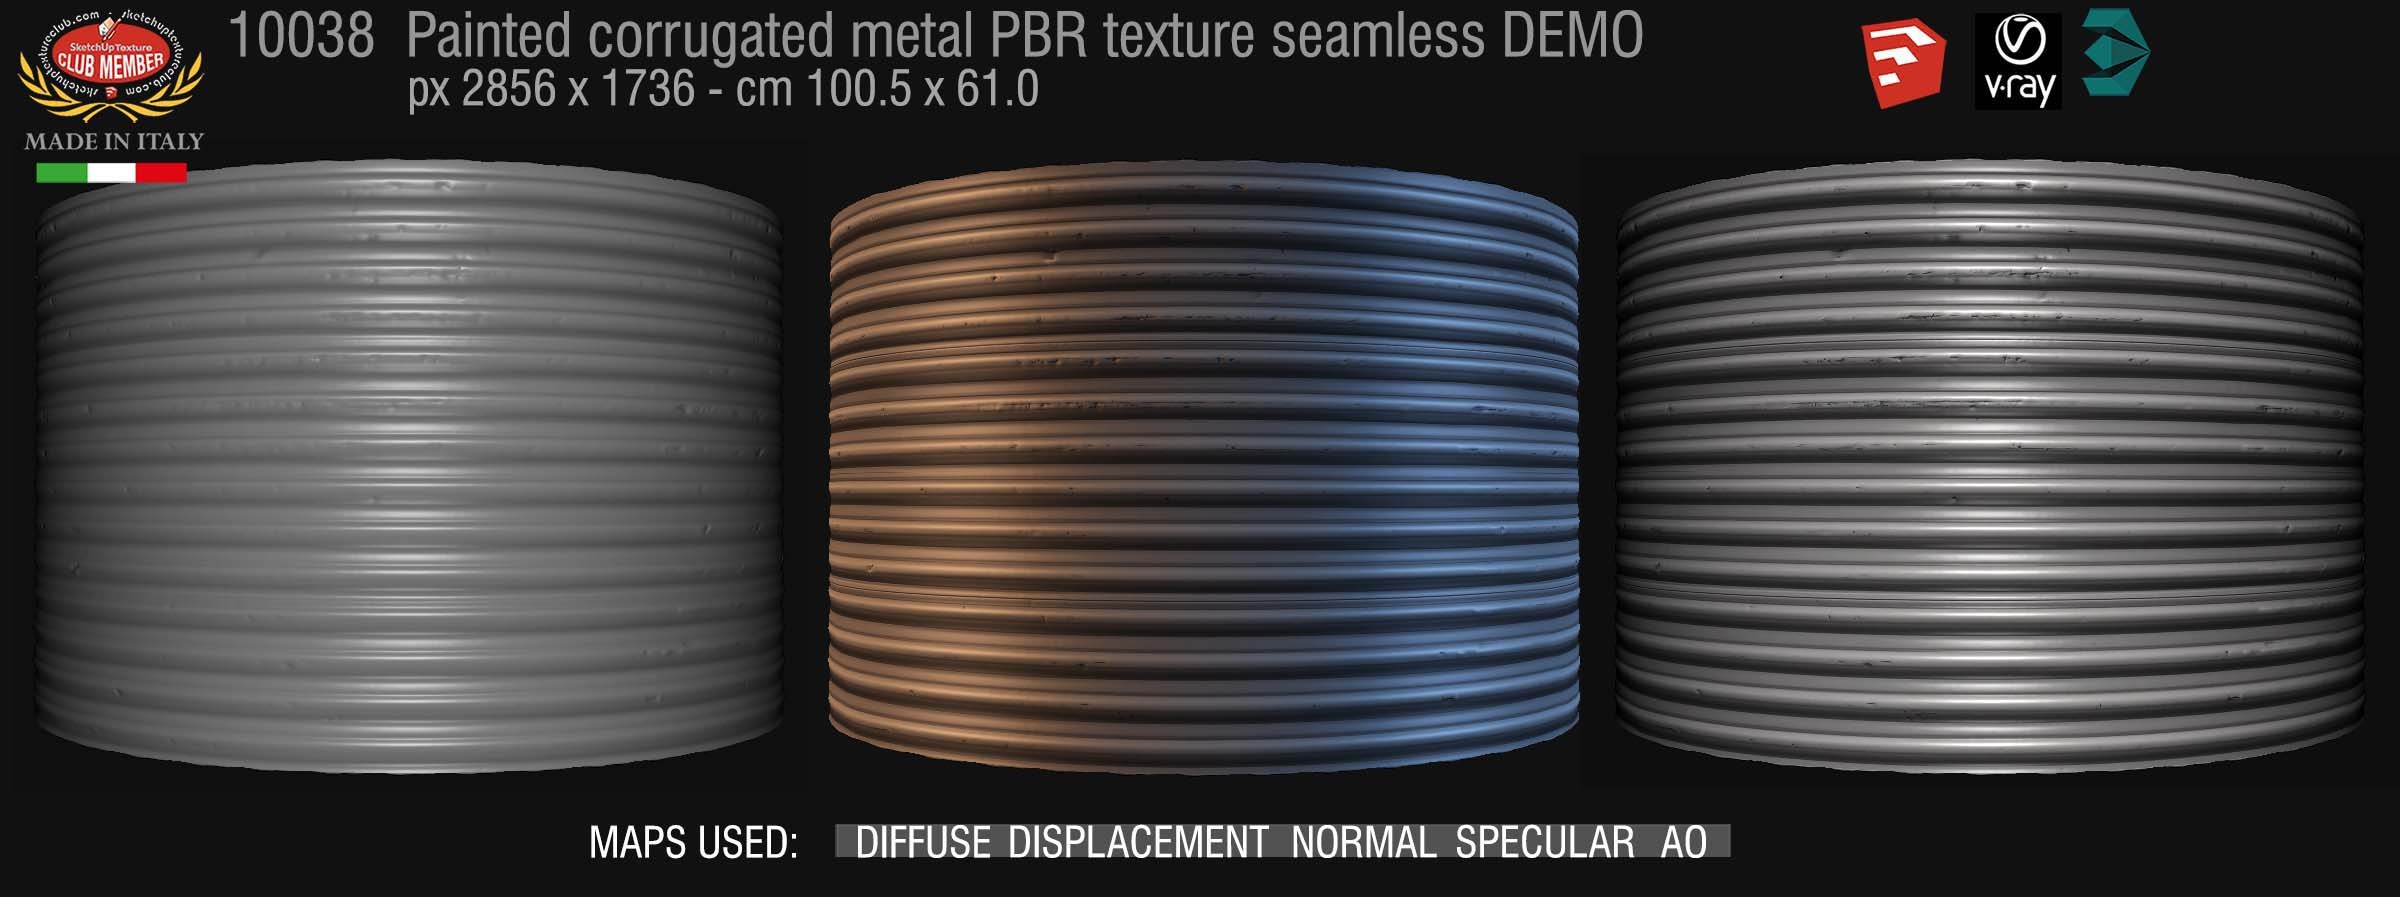 10038 Painted corrugated metal PBR texture seamless DEMO